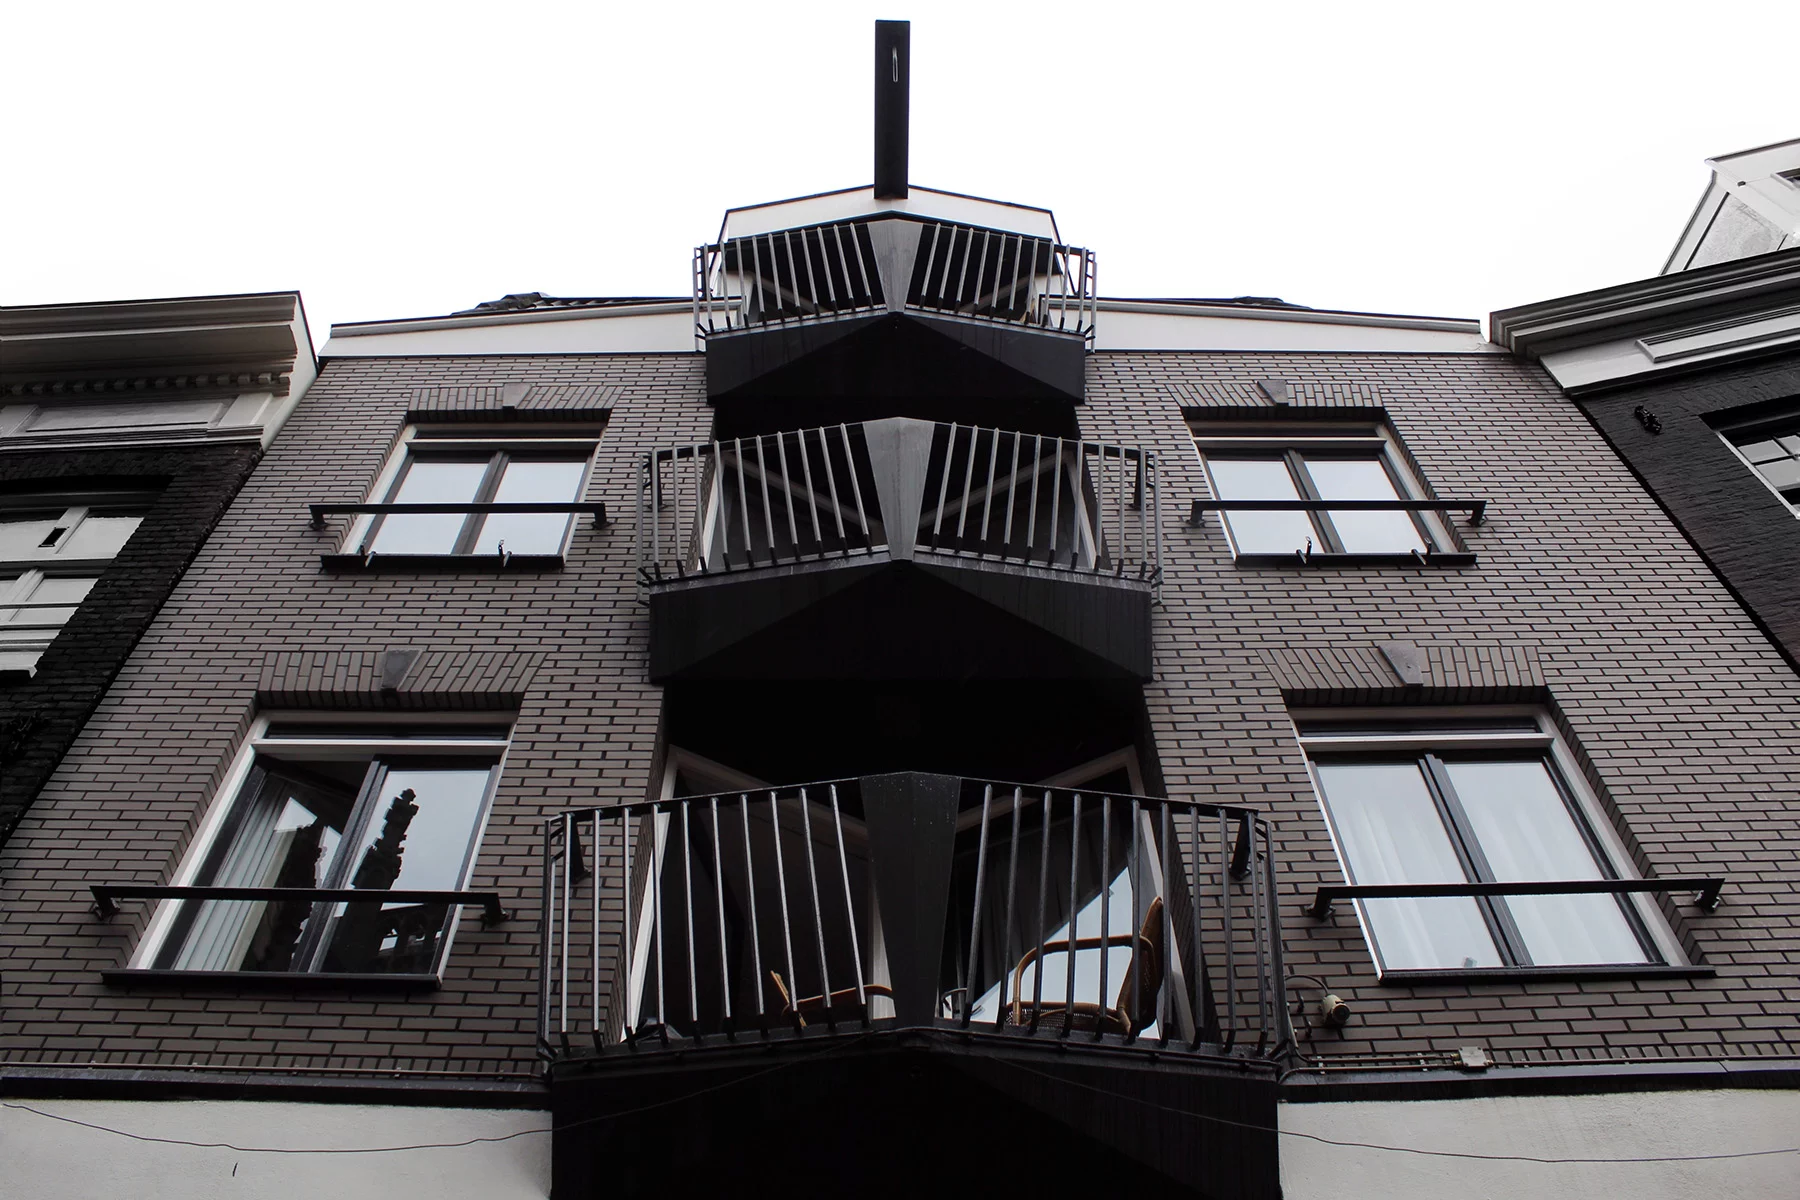 Renovated apartment building in Amsterdam